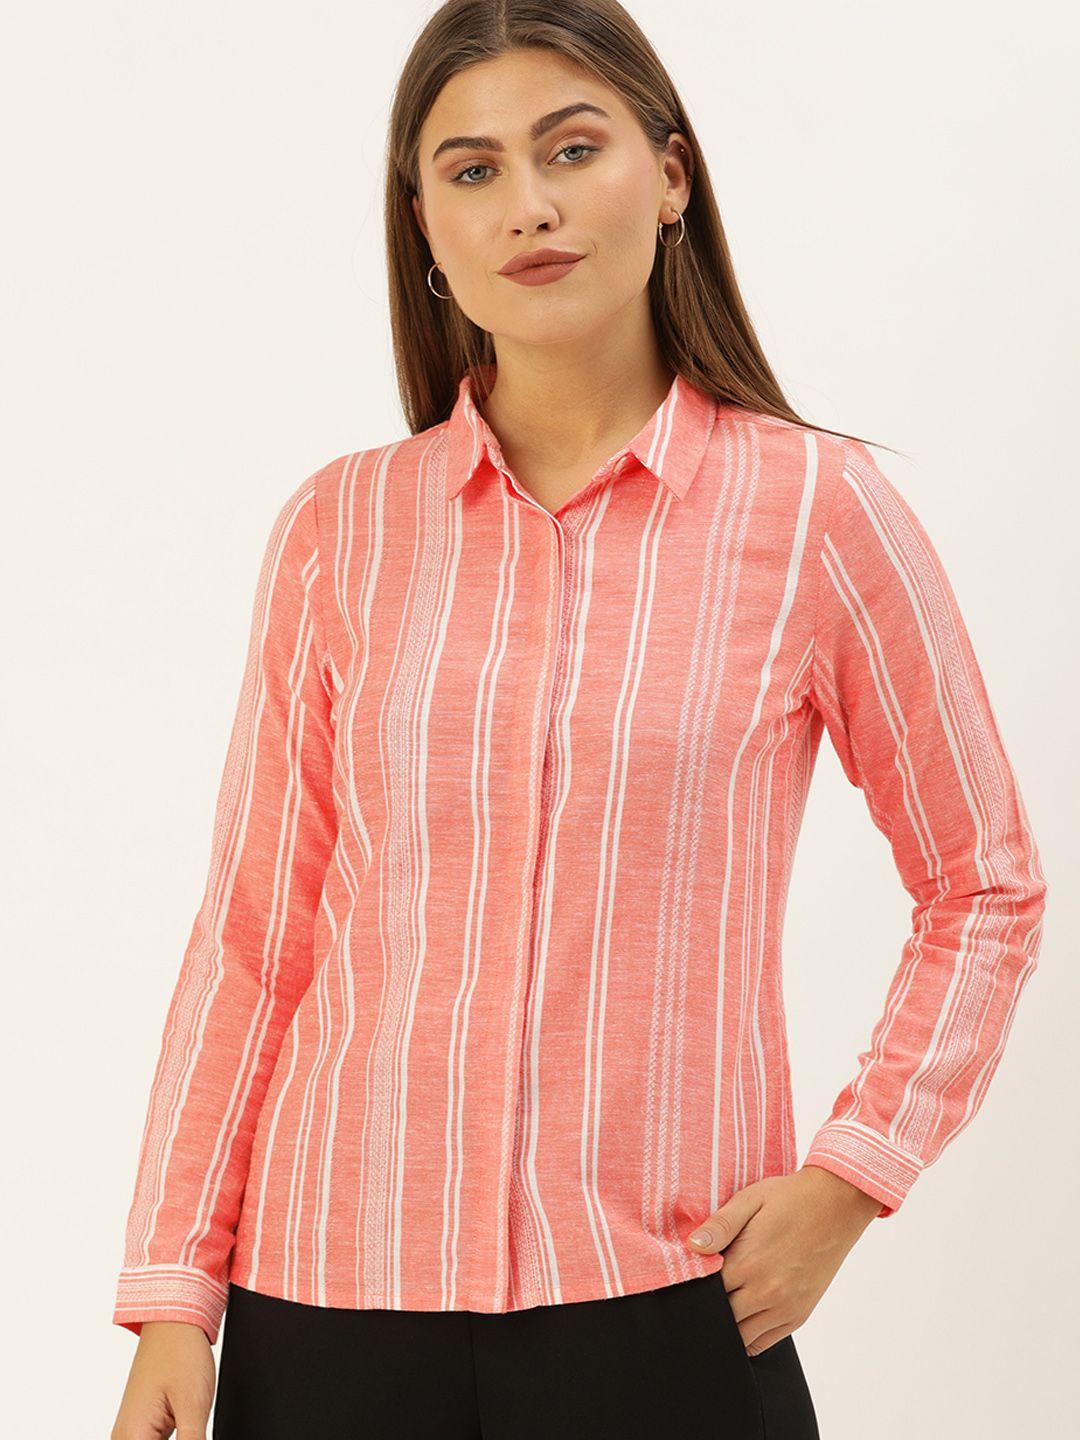 and-women-peach-coloured-&-white-regular-fit-striped-casual-shirt